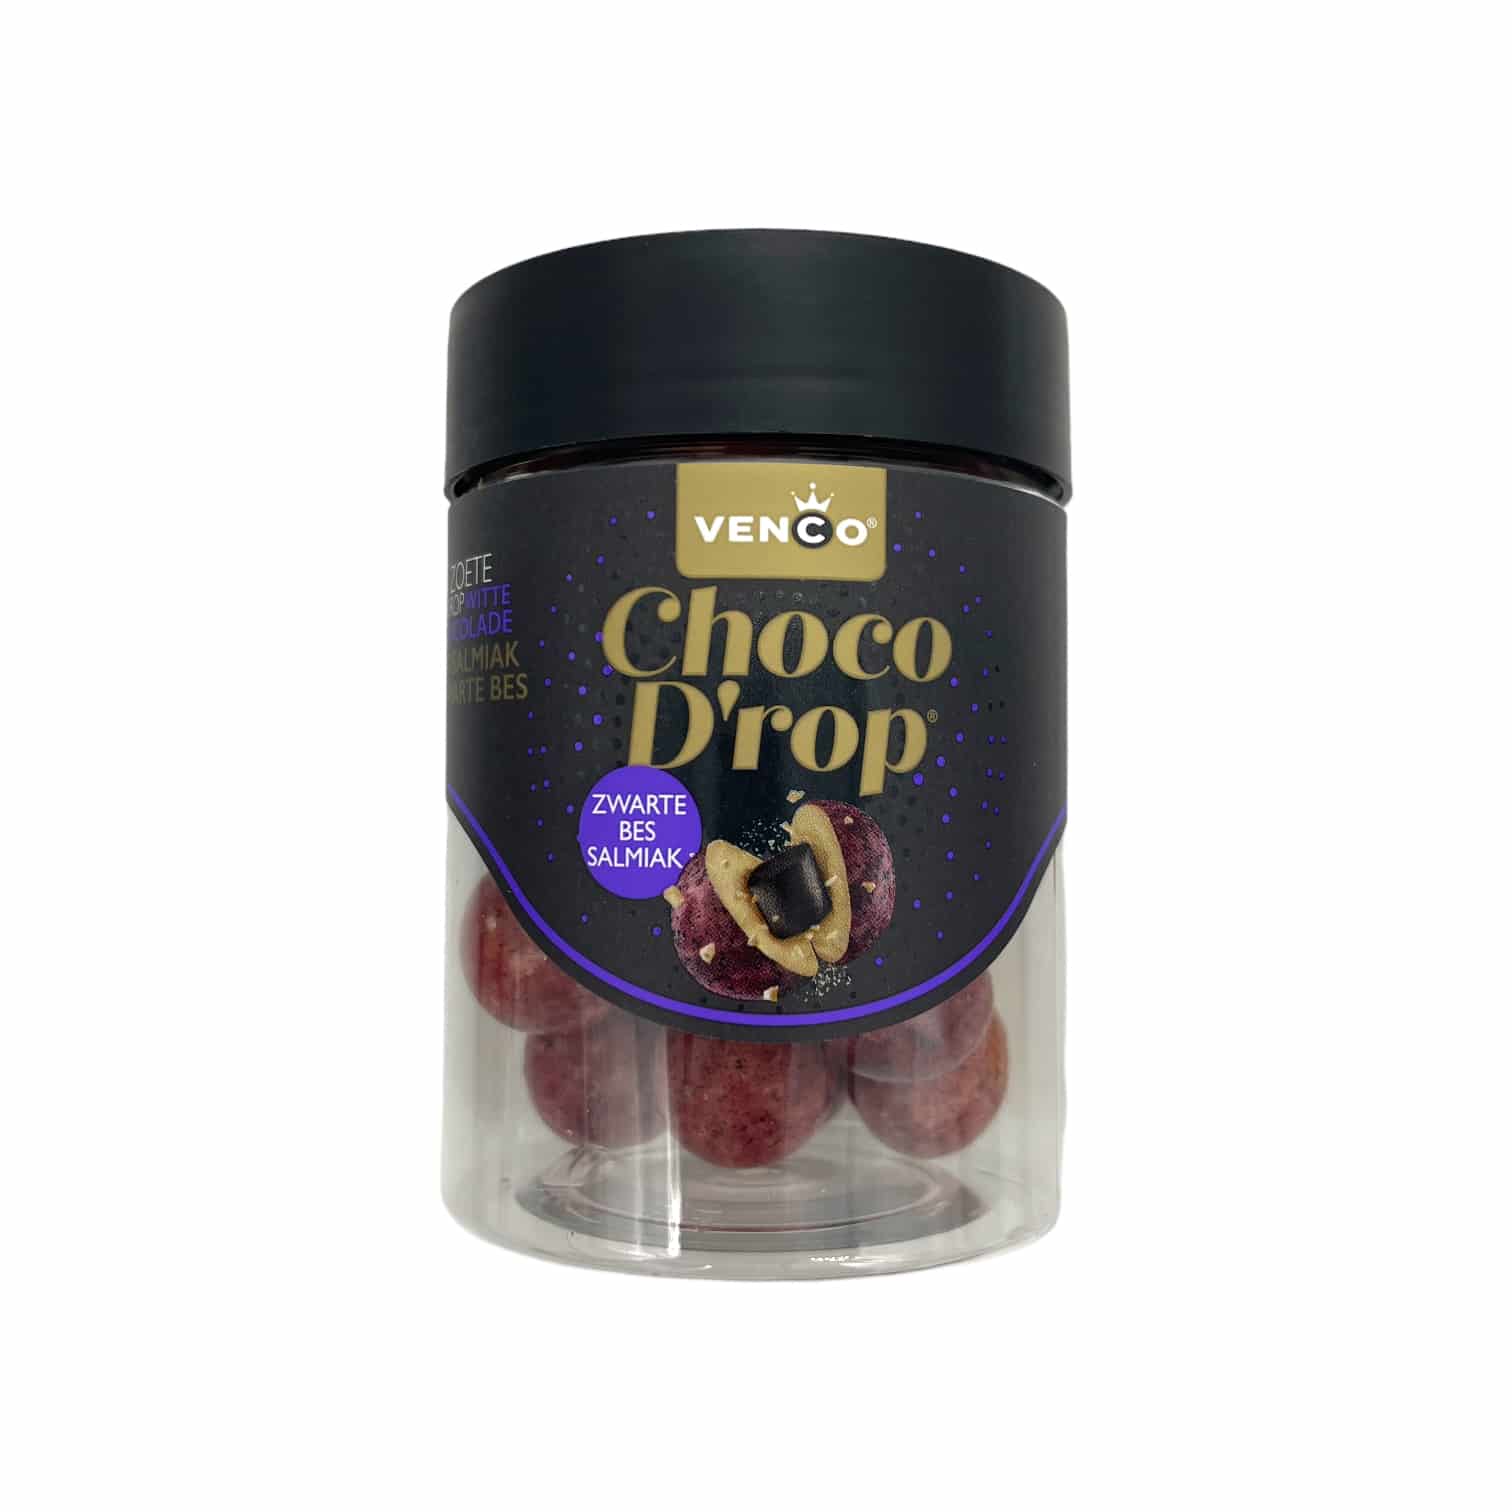 Venco Choco D'rop dunkle Beere 146g